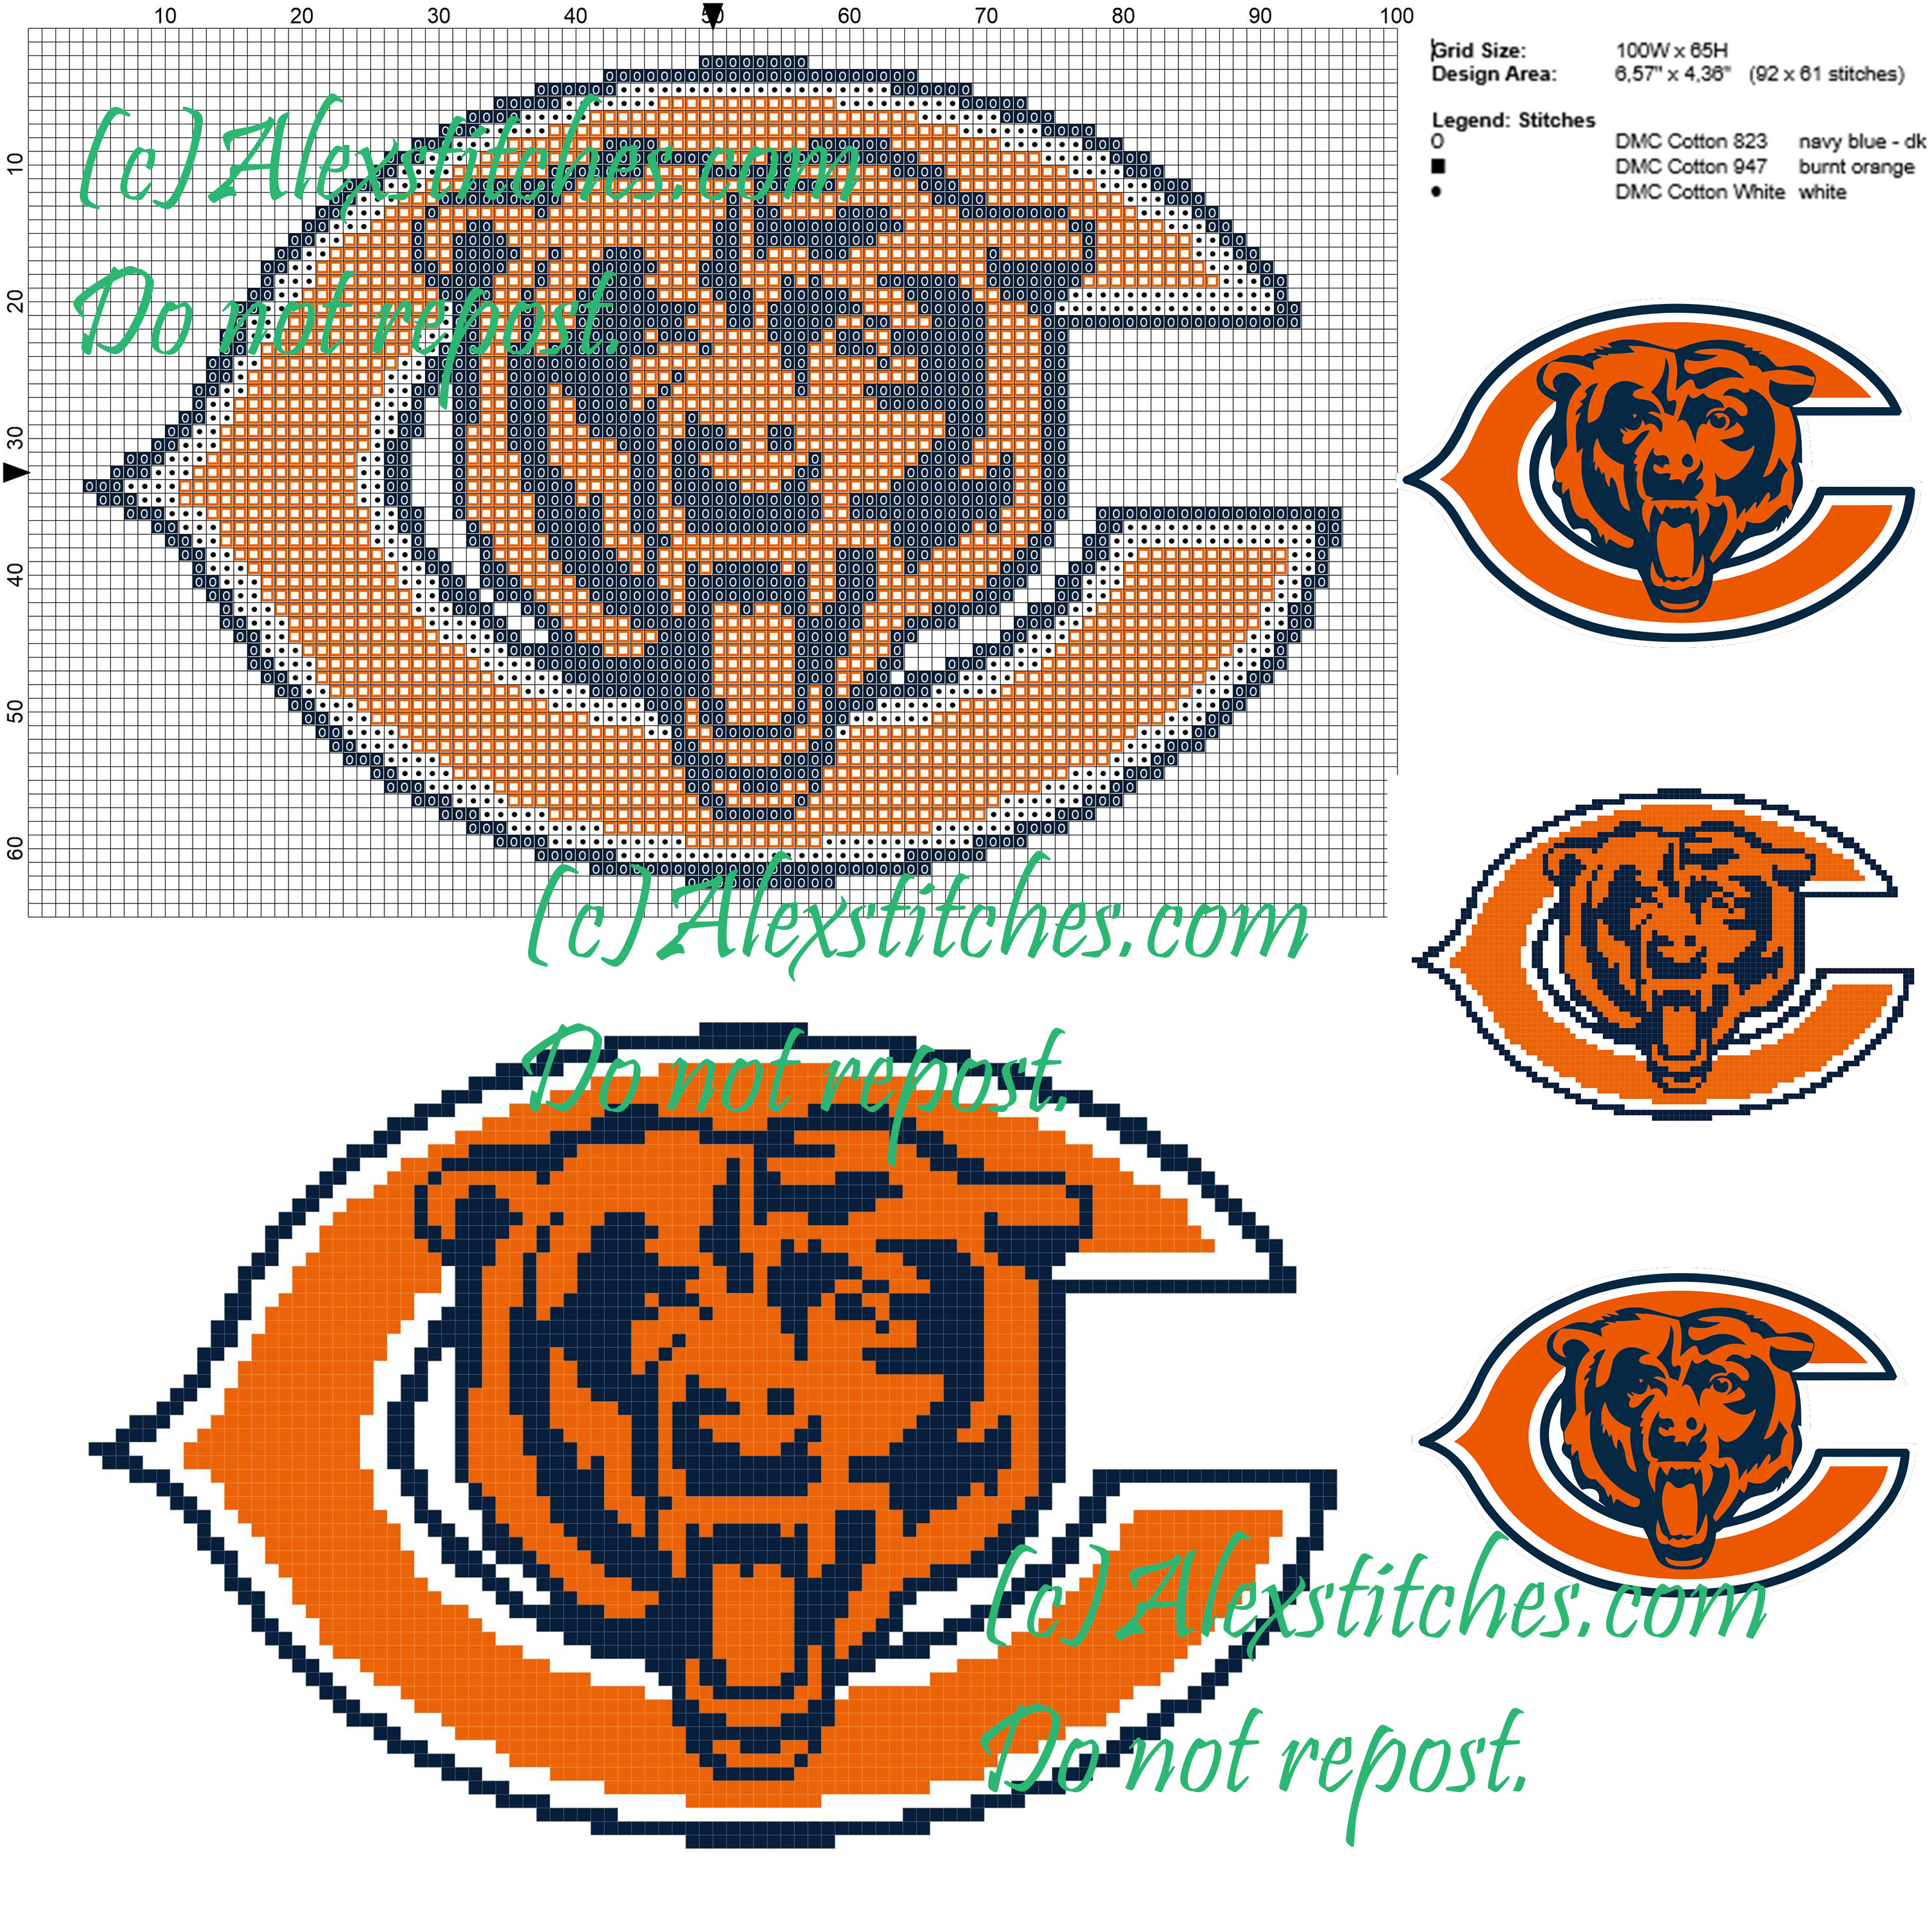 Chicago Bears national football league (NFL) cross stitch pattern 100x65 3 colors